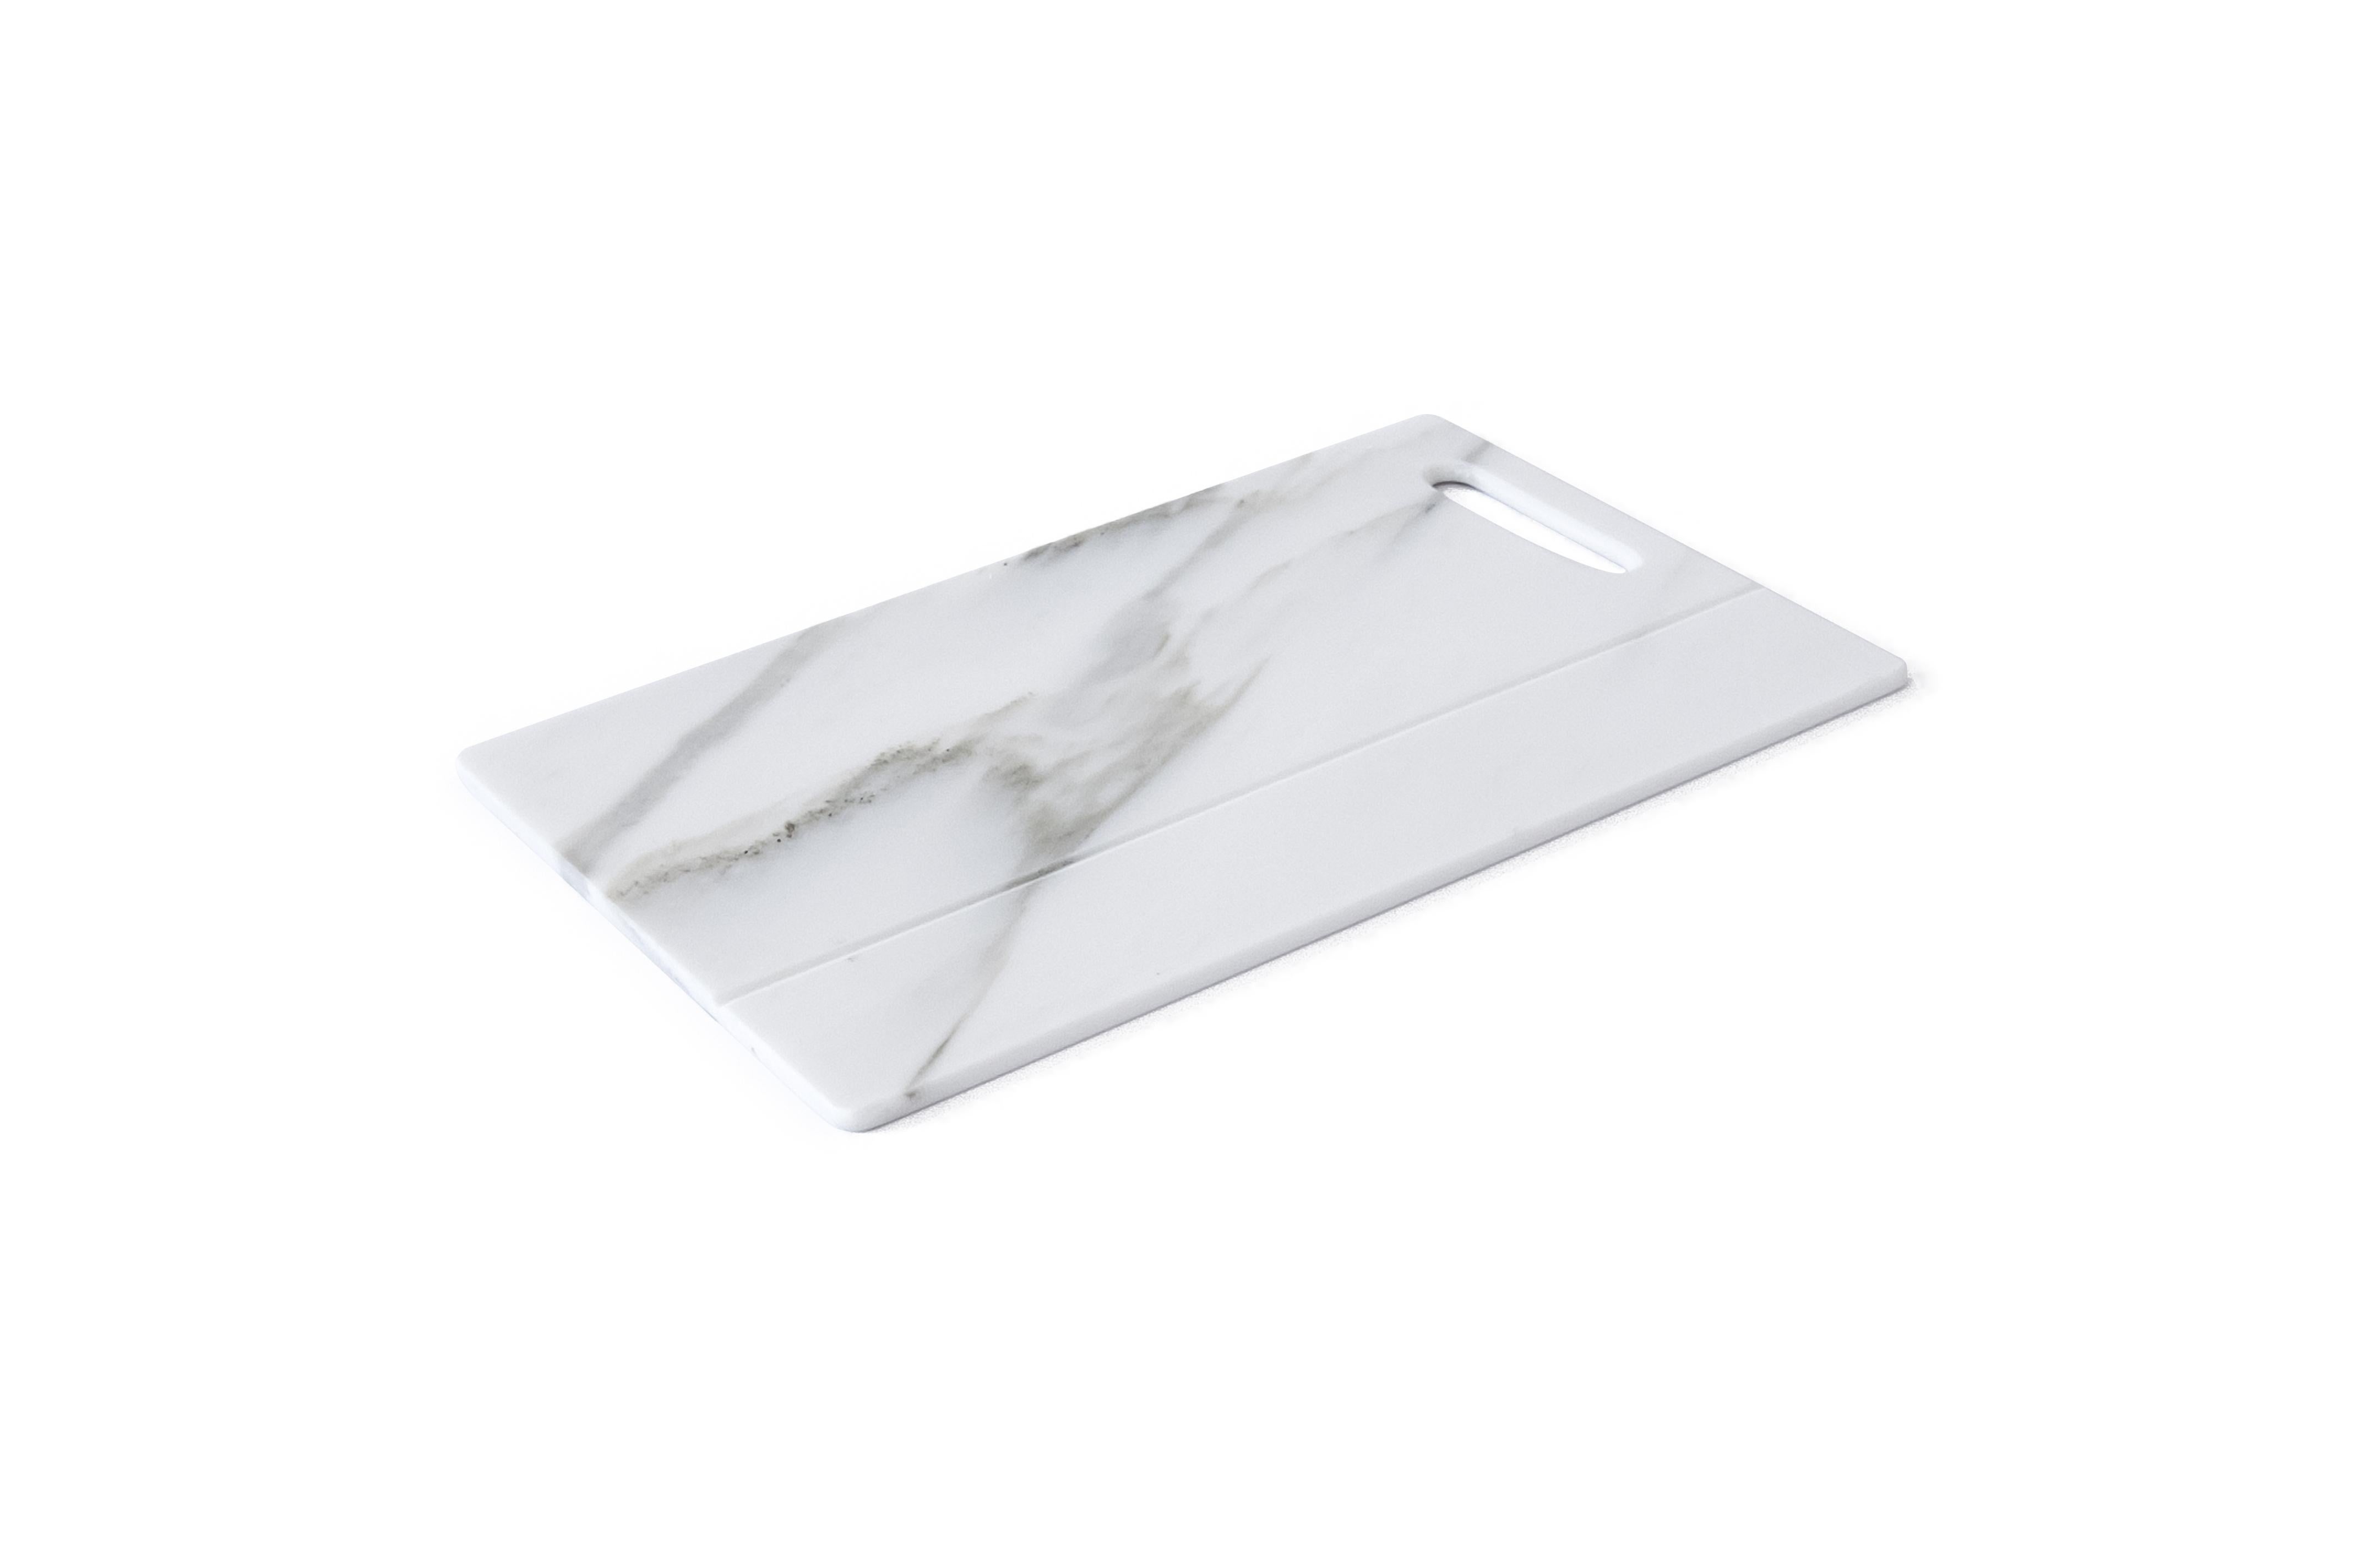 White Carrara marble asymmetric chopping board.

Each piece is in a way unique (every marble block is different in veins and shades) and handmade by Italian artisans specialized over generations in processing marble. Slight variations in shape,